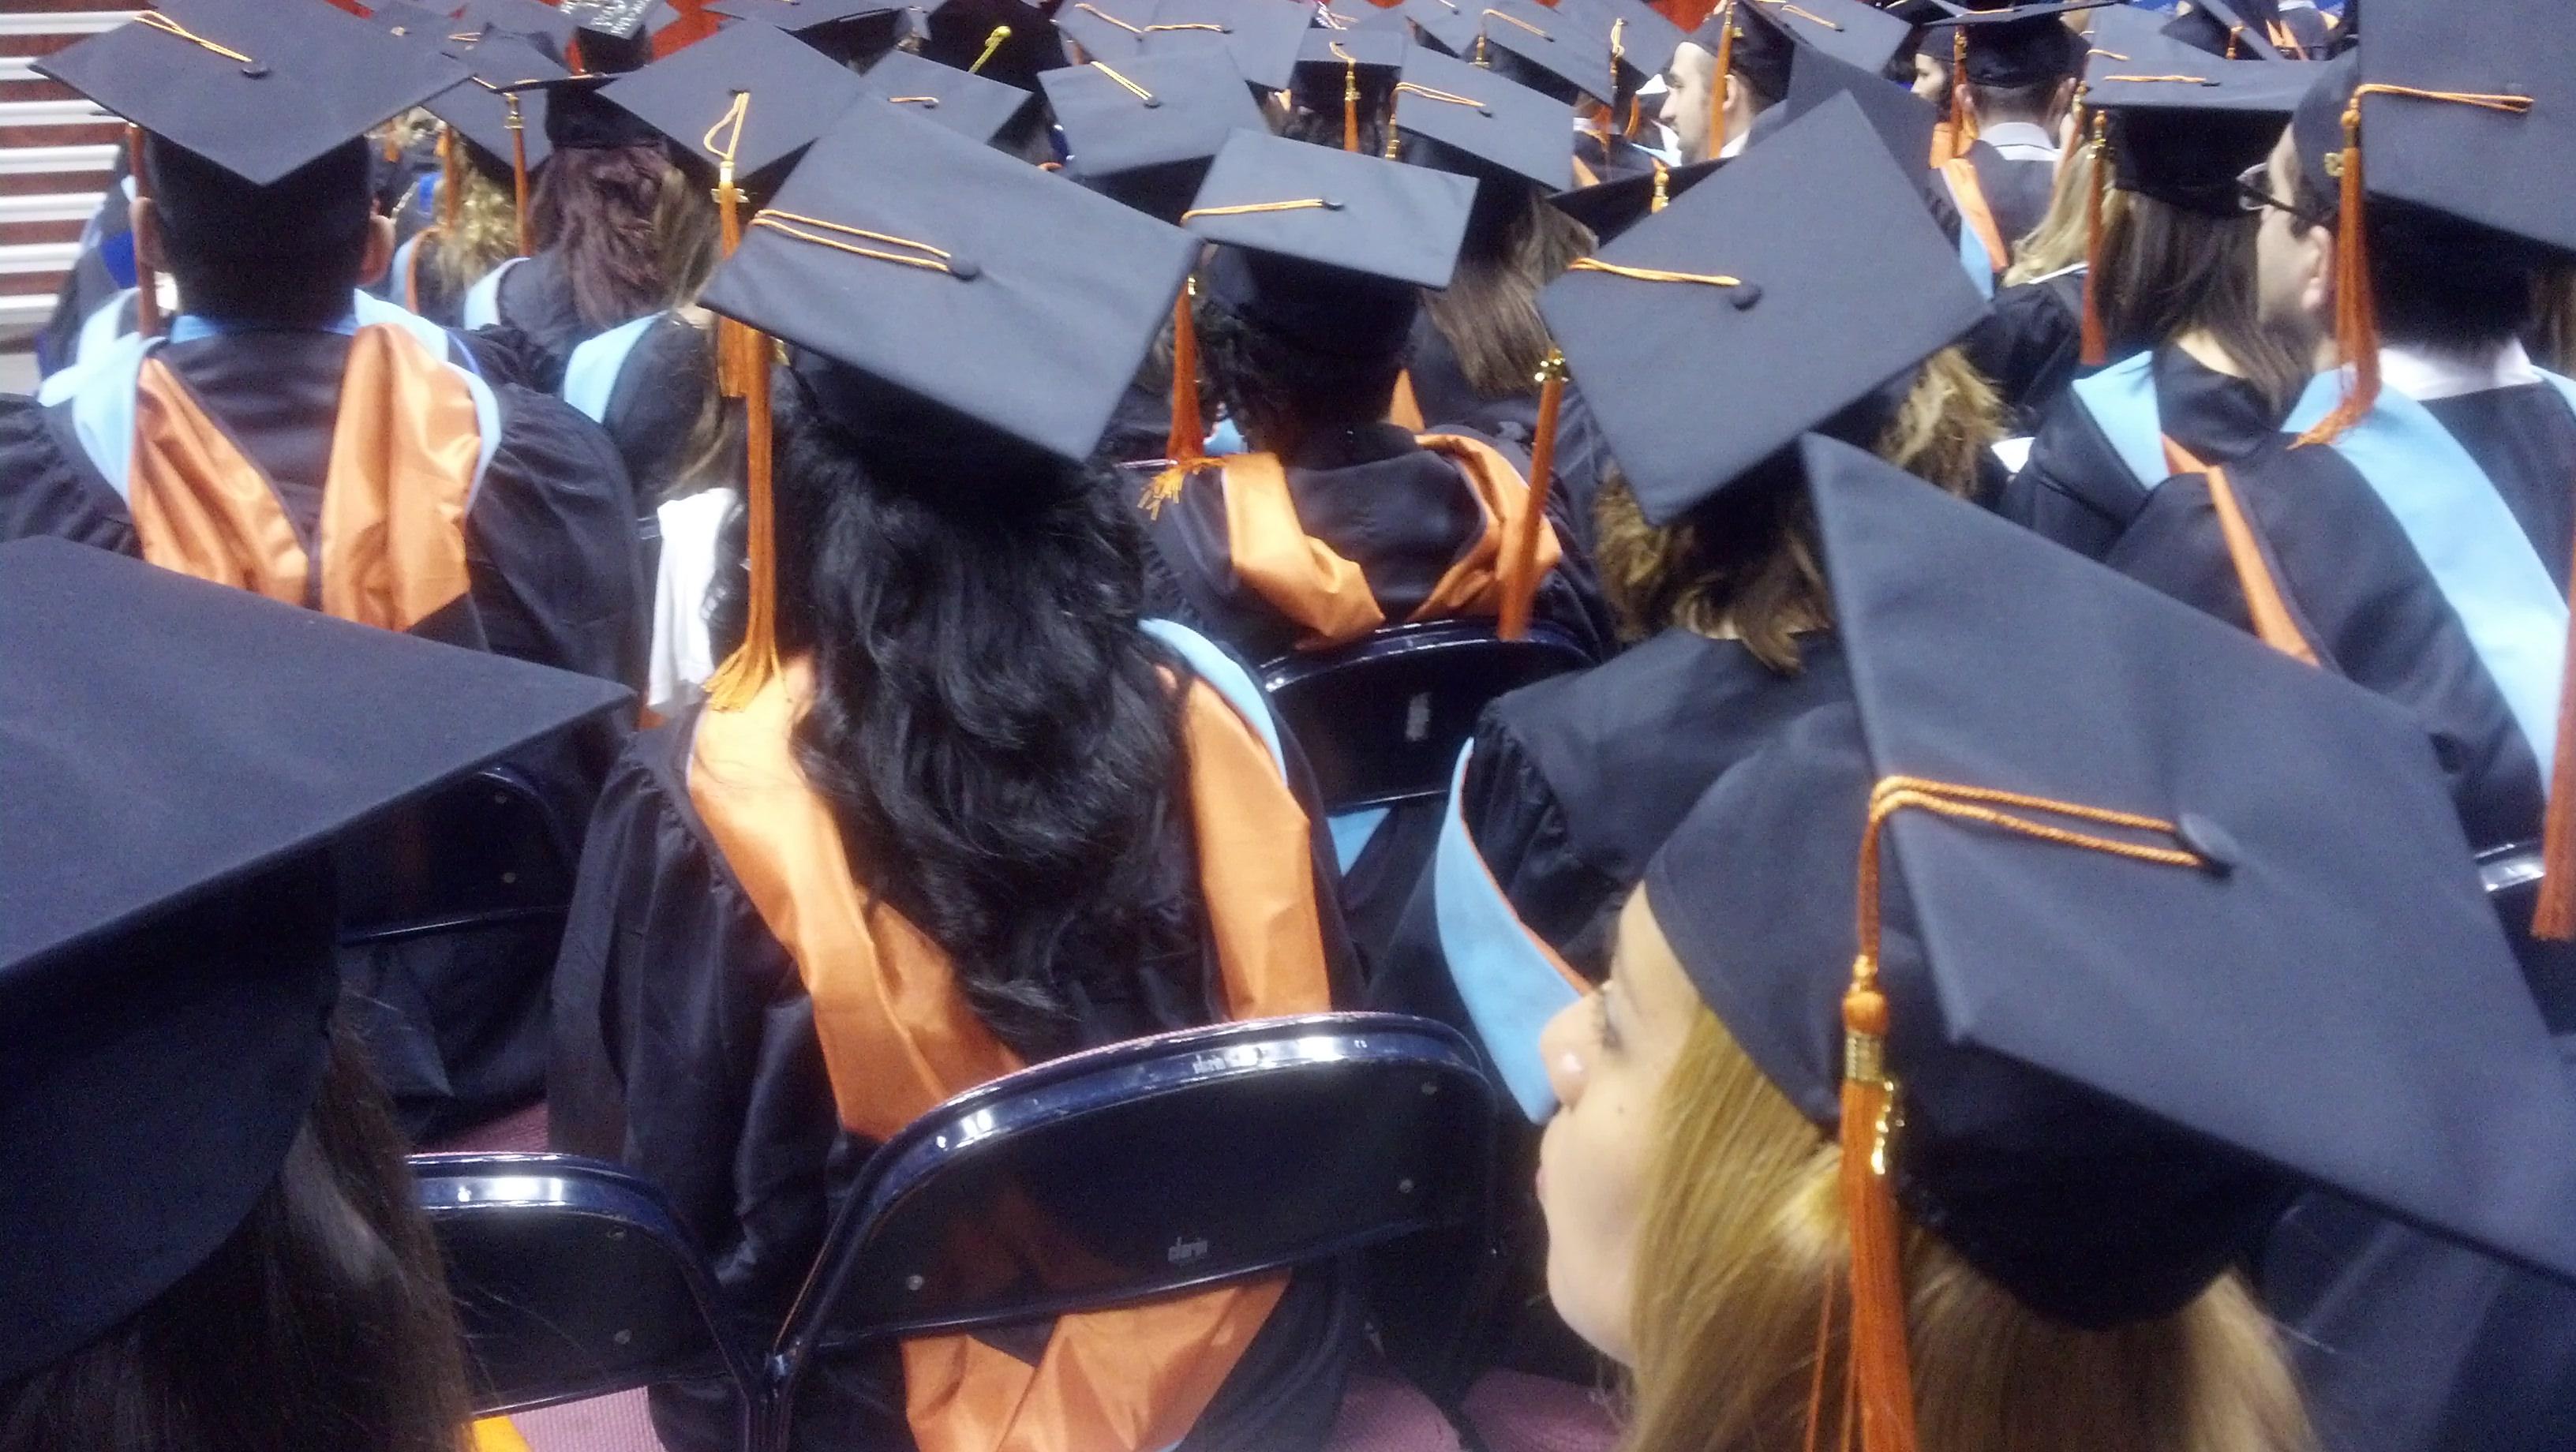 students at graduation sit attentively with their tassles still on the left side of their mortar boards.